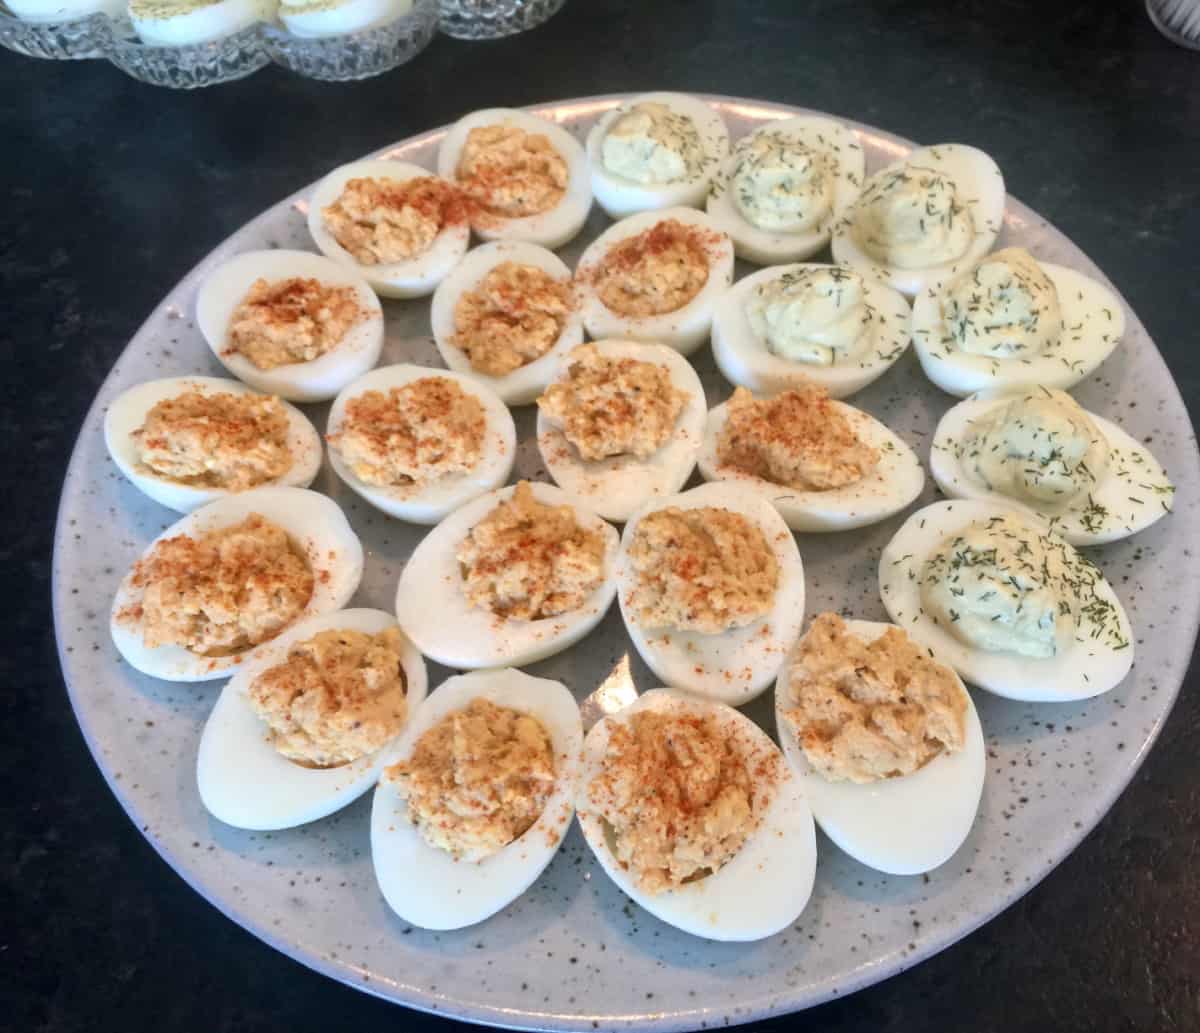 Round Platter of Deviled Eggs Garnished with Parsley and Dill